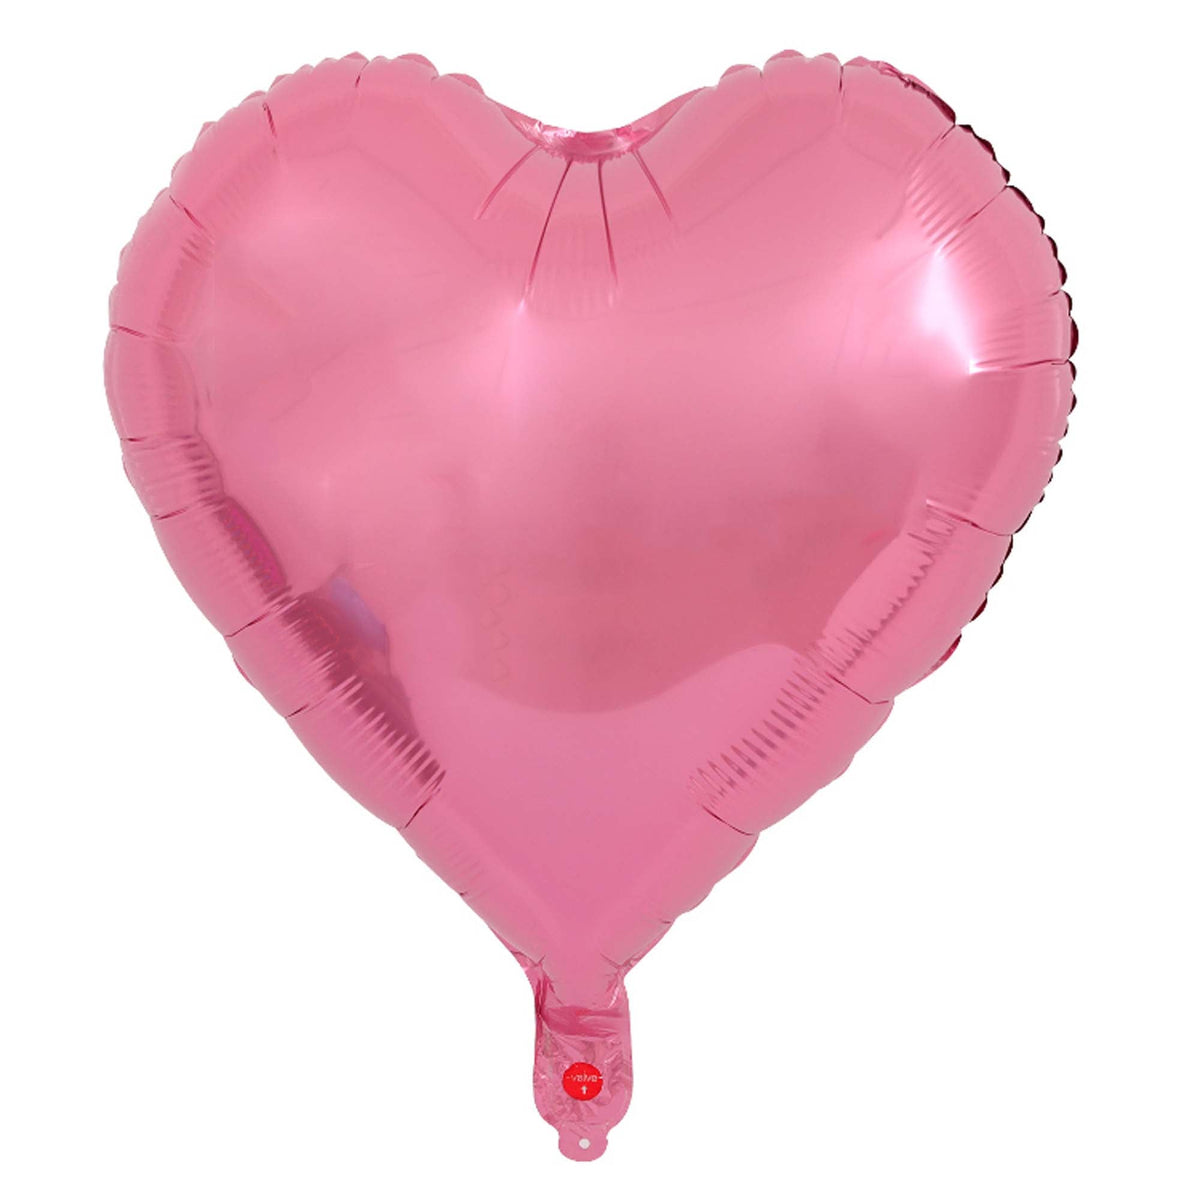 BOOMBA INTERNATIONAL TRADING CO,. LTD Balloons Metallic Pink Heart Shaped Foil Balloon, 18 Inches, 1 Count